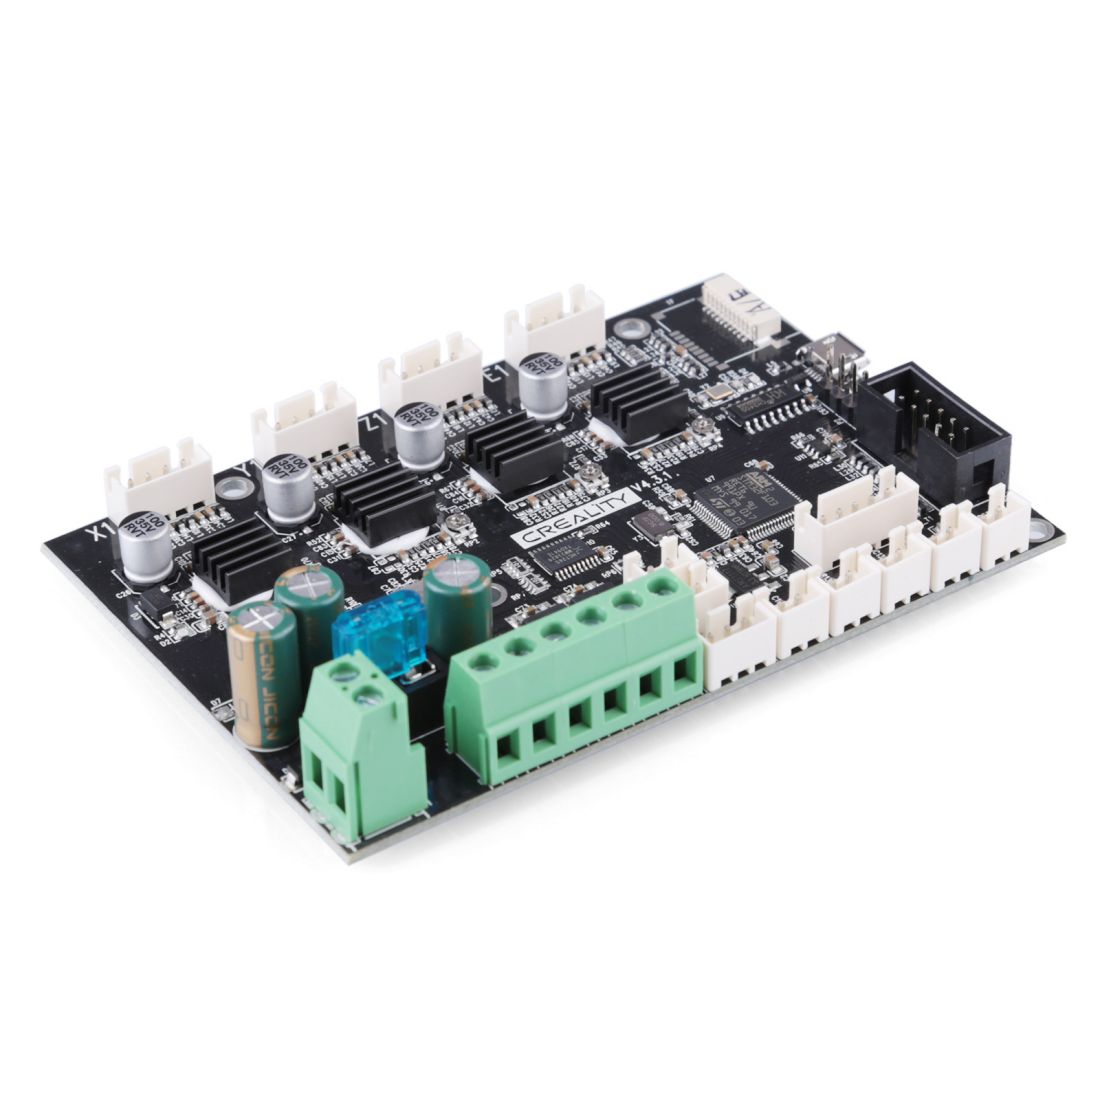 Creality Ender-6 Silent Motherboard (Firmware Preconfigured)